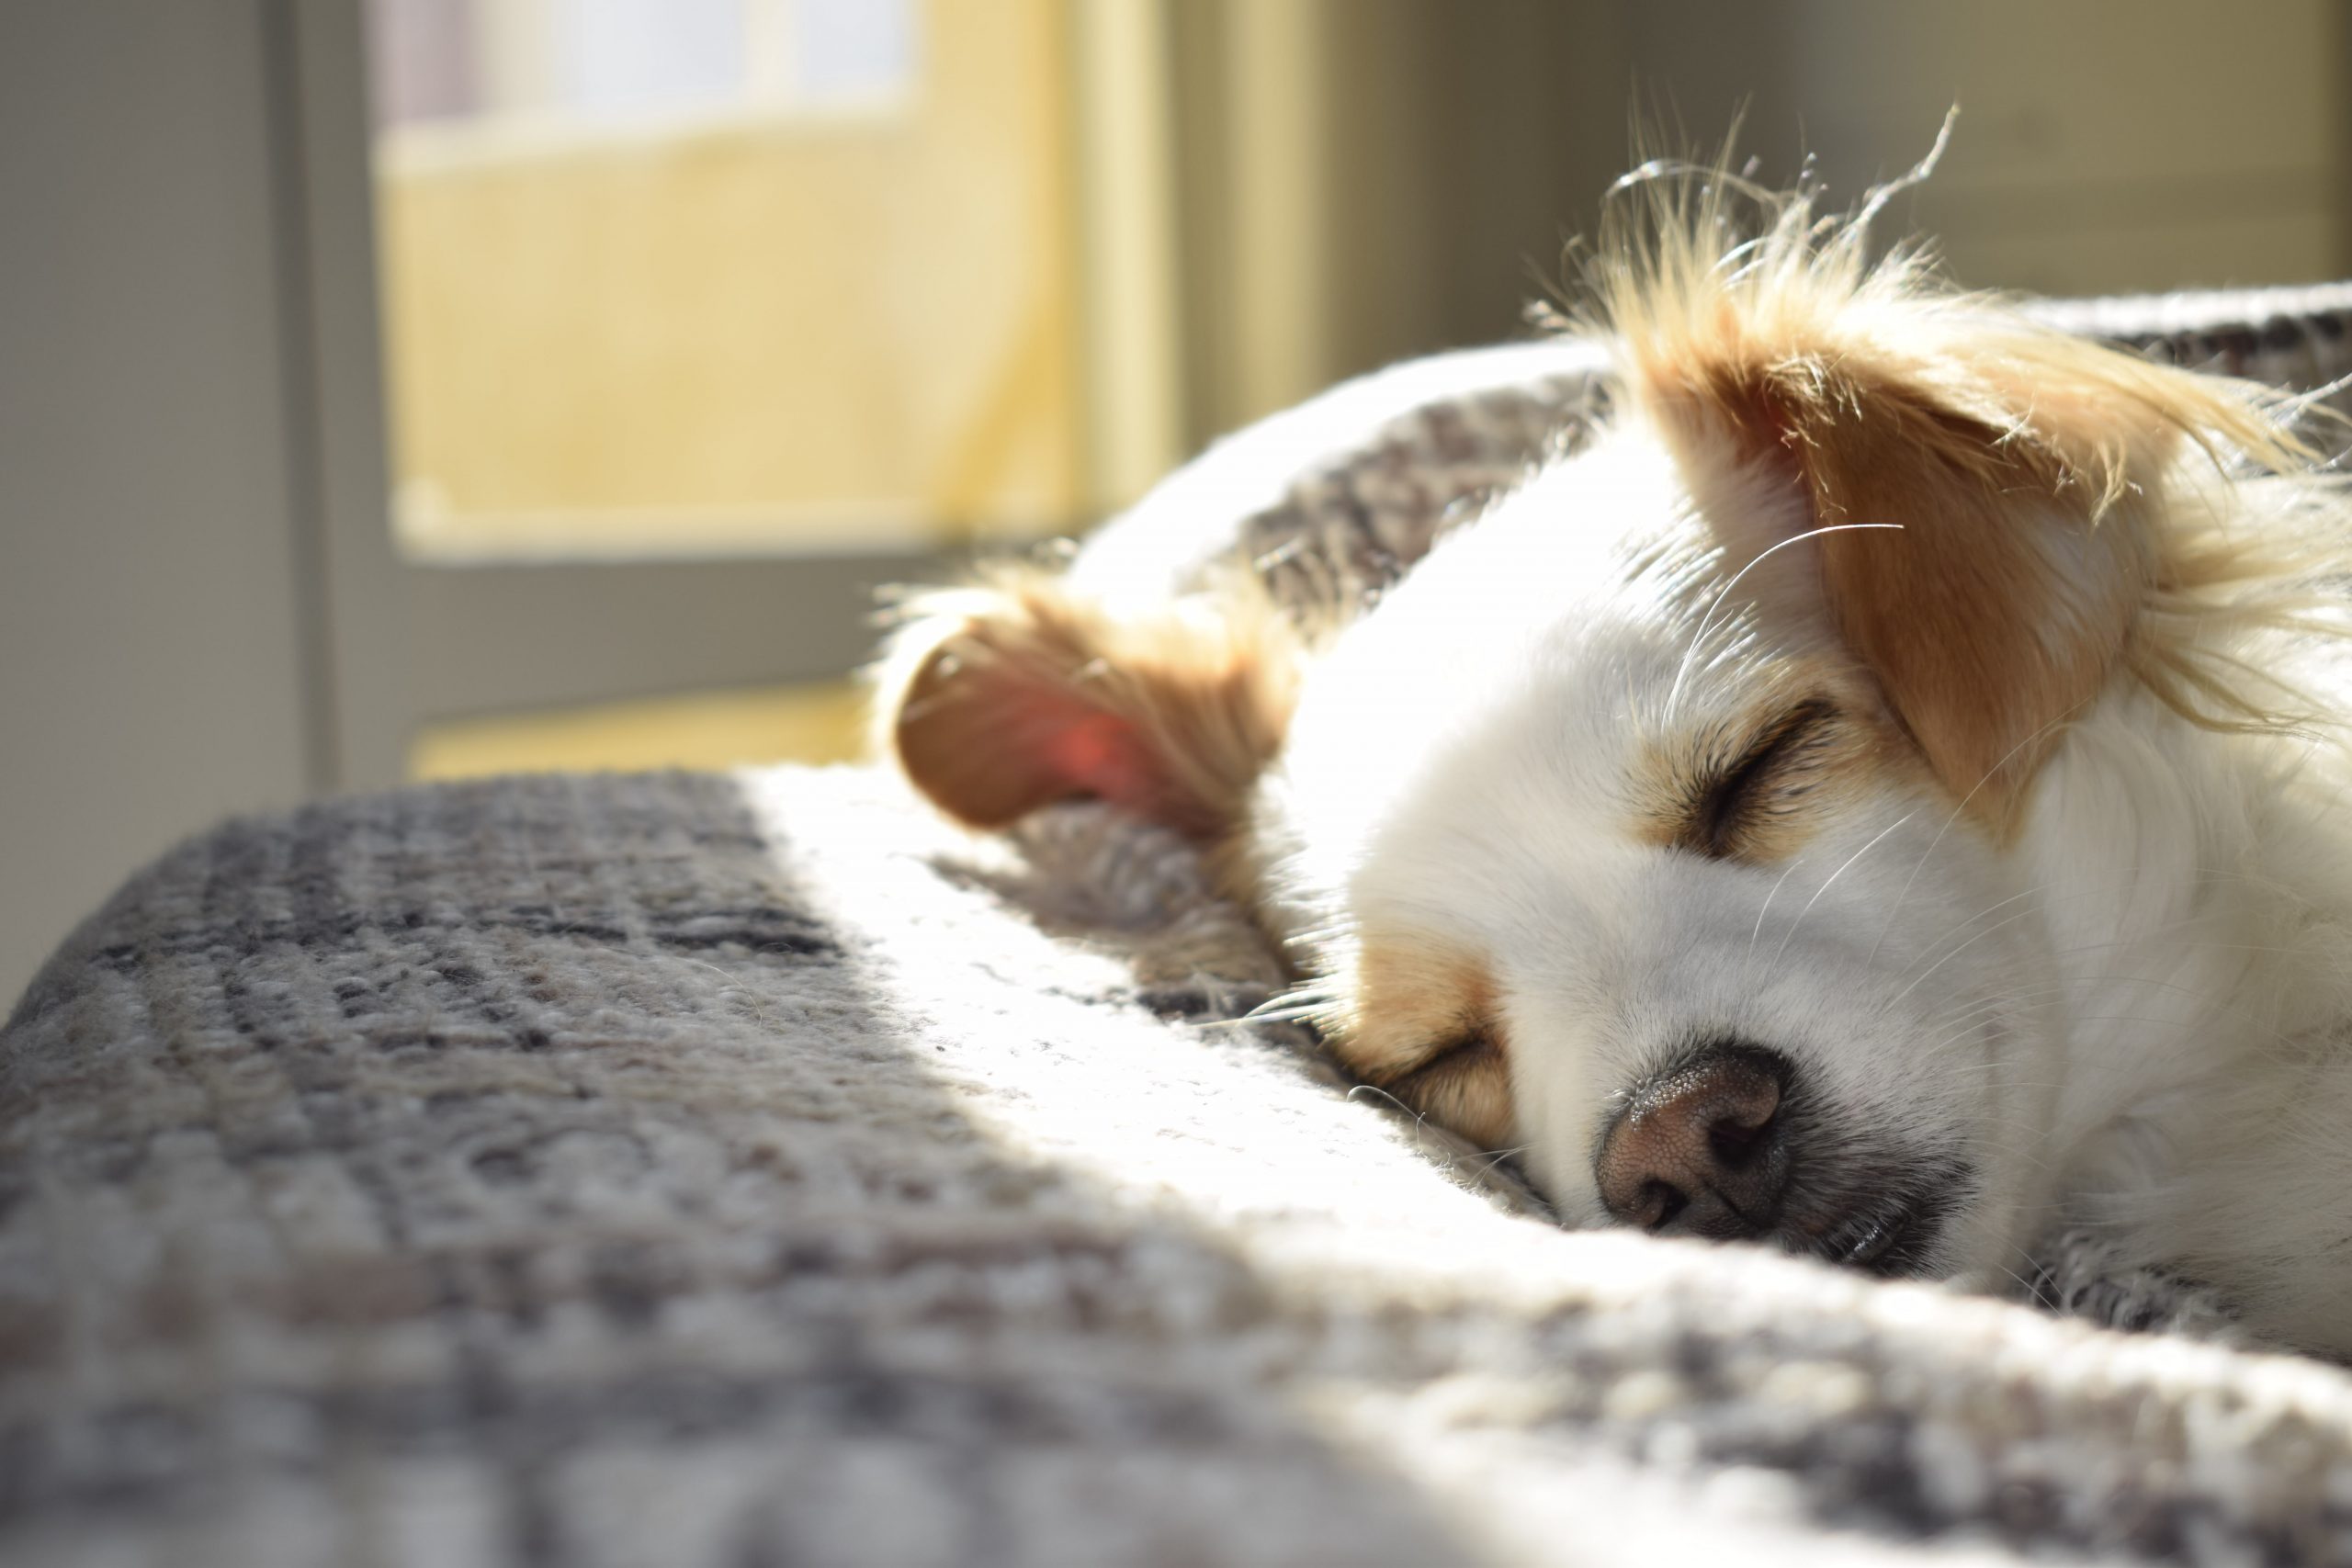 Bed wetting in dogs: Why Does My Dog Pee on My Bed?